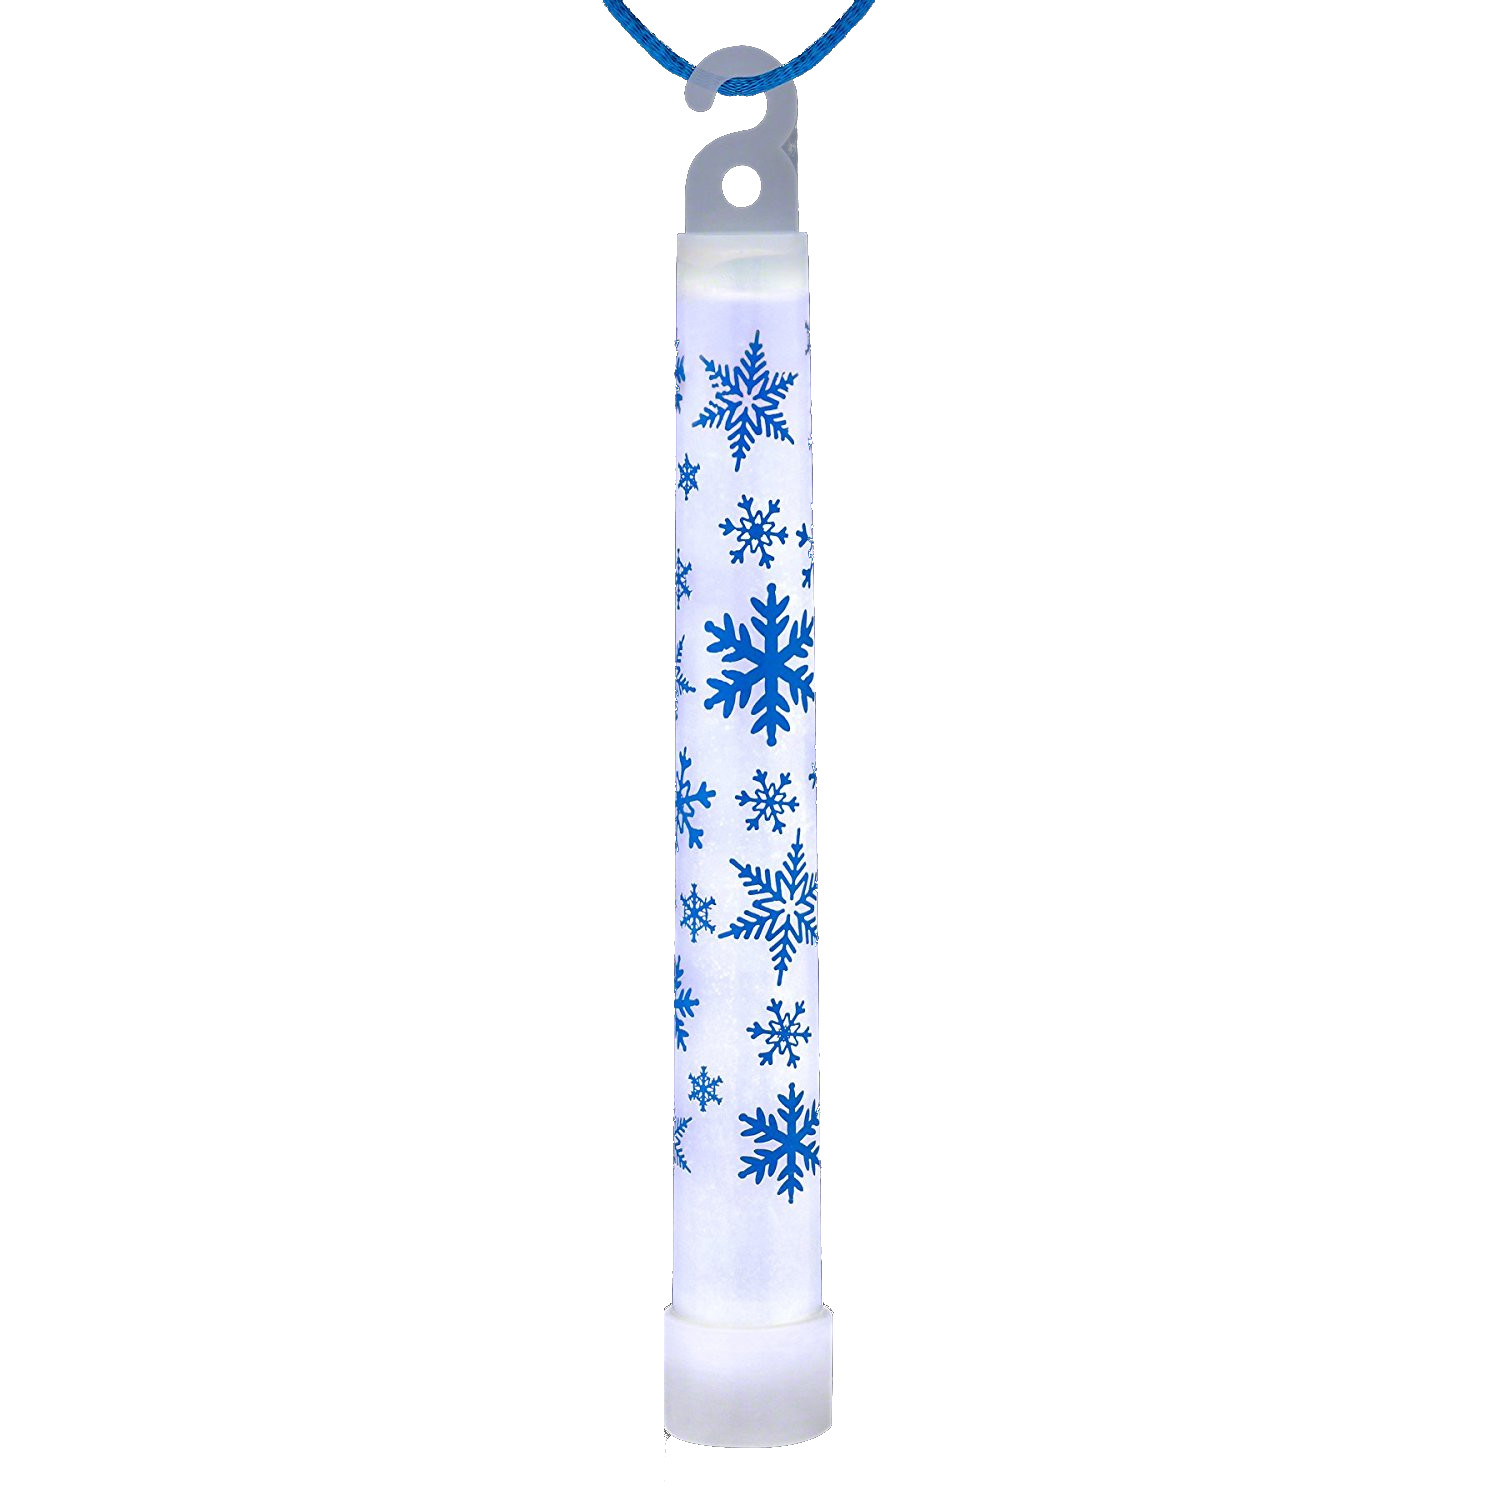 Snowflake 6 Inch GLOW STICK Pack of 25